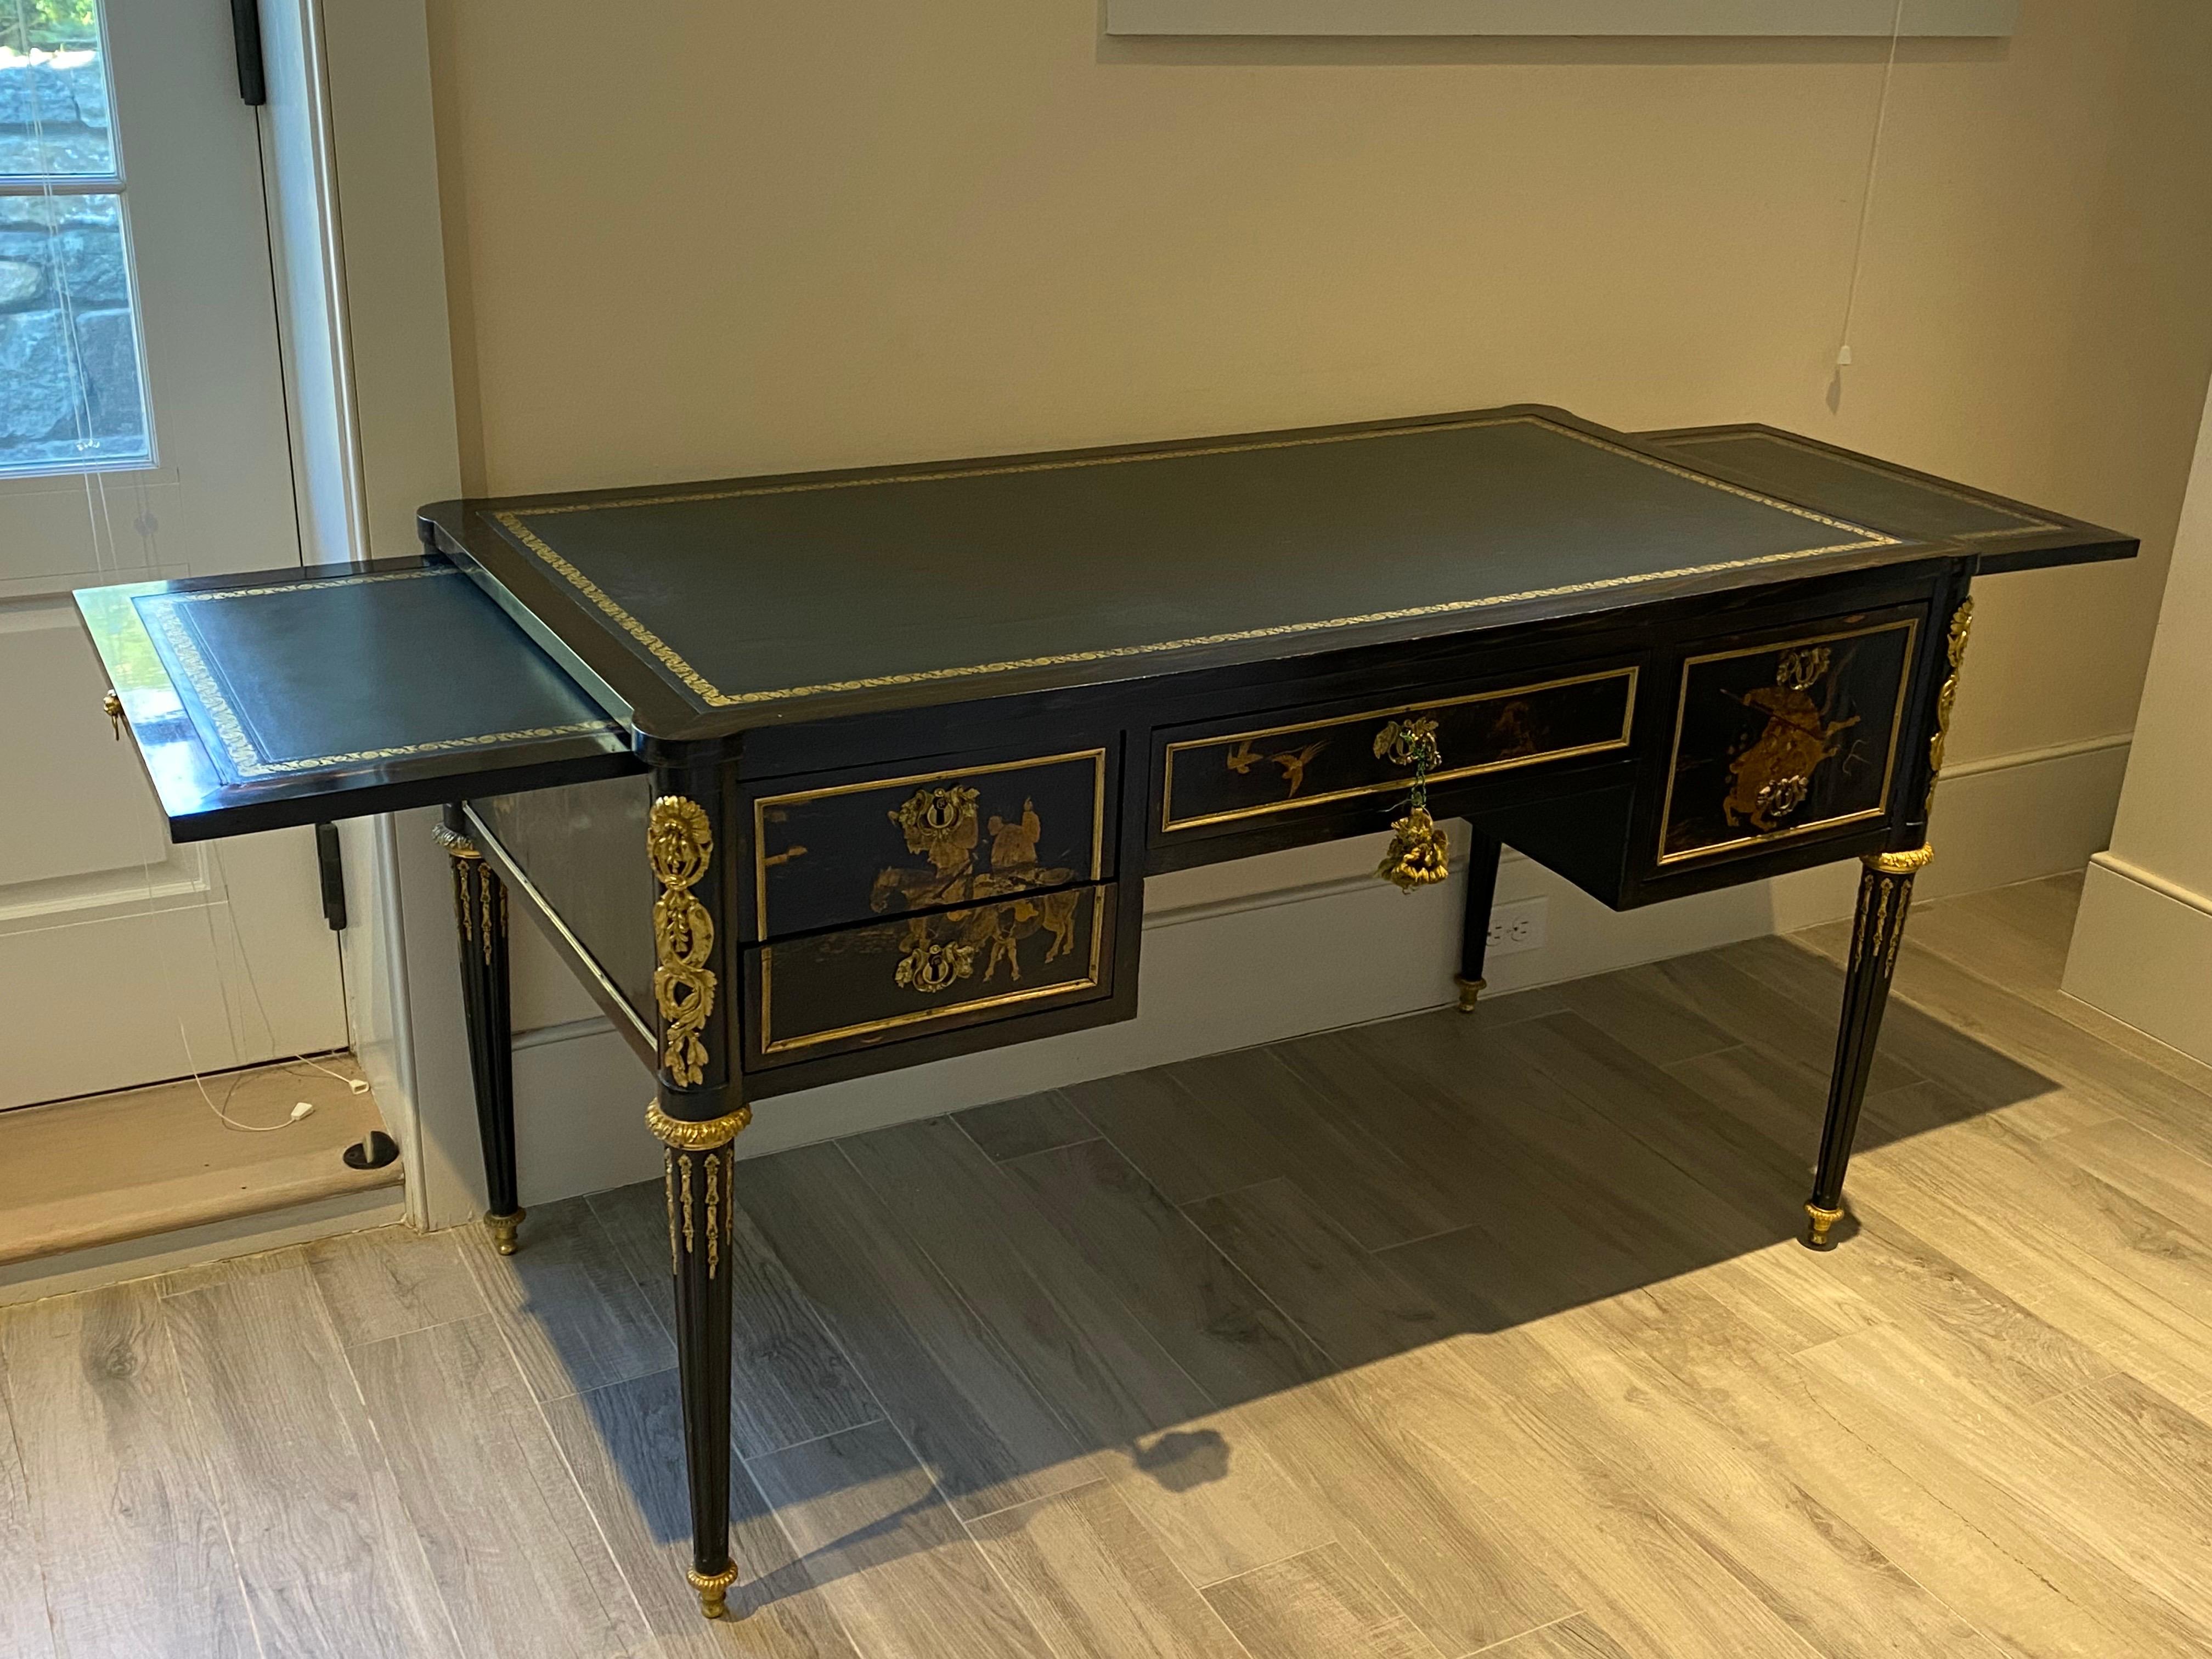 18th C. Continental Black Lacquer Chinoiserie Bureau Plat with Gilt Bronze Ormolu sourced by designers Parish Hadley.
Black lacquer with fine gilt bronze ormolu. Chinoiserie decoration detail is very fine. Two sliding shelves pull out on either side